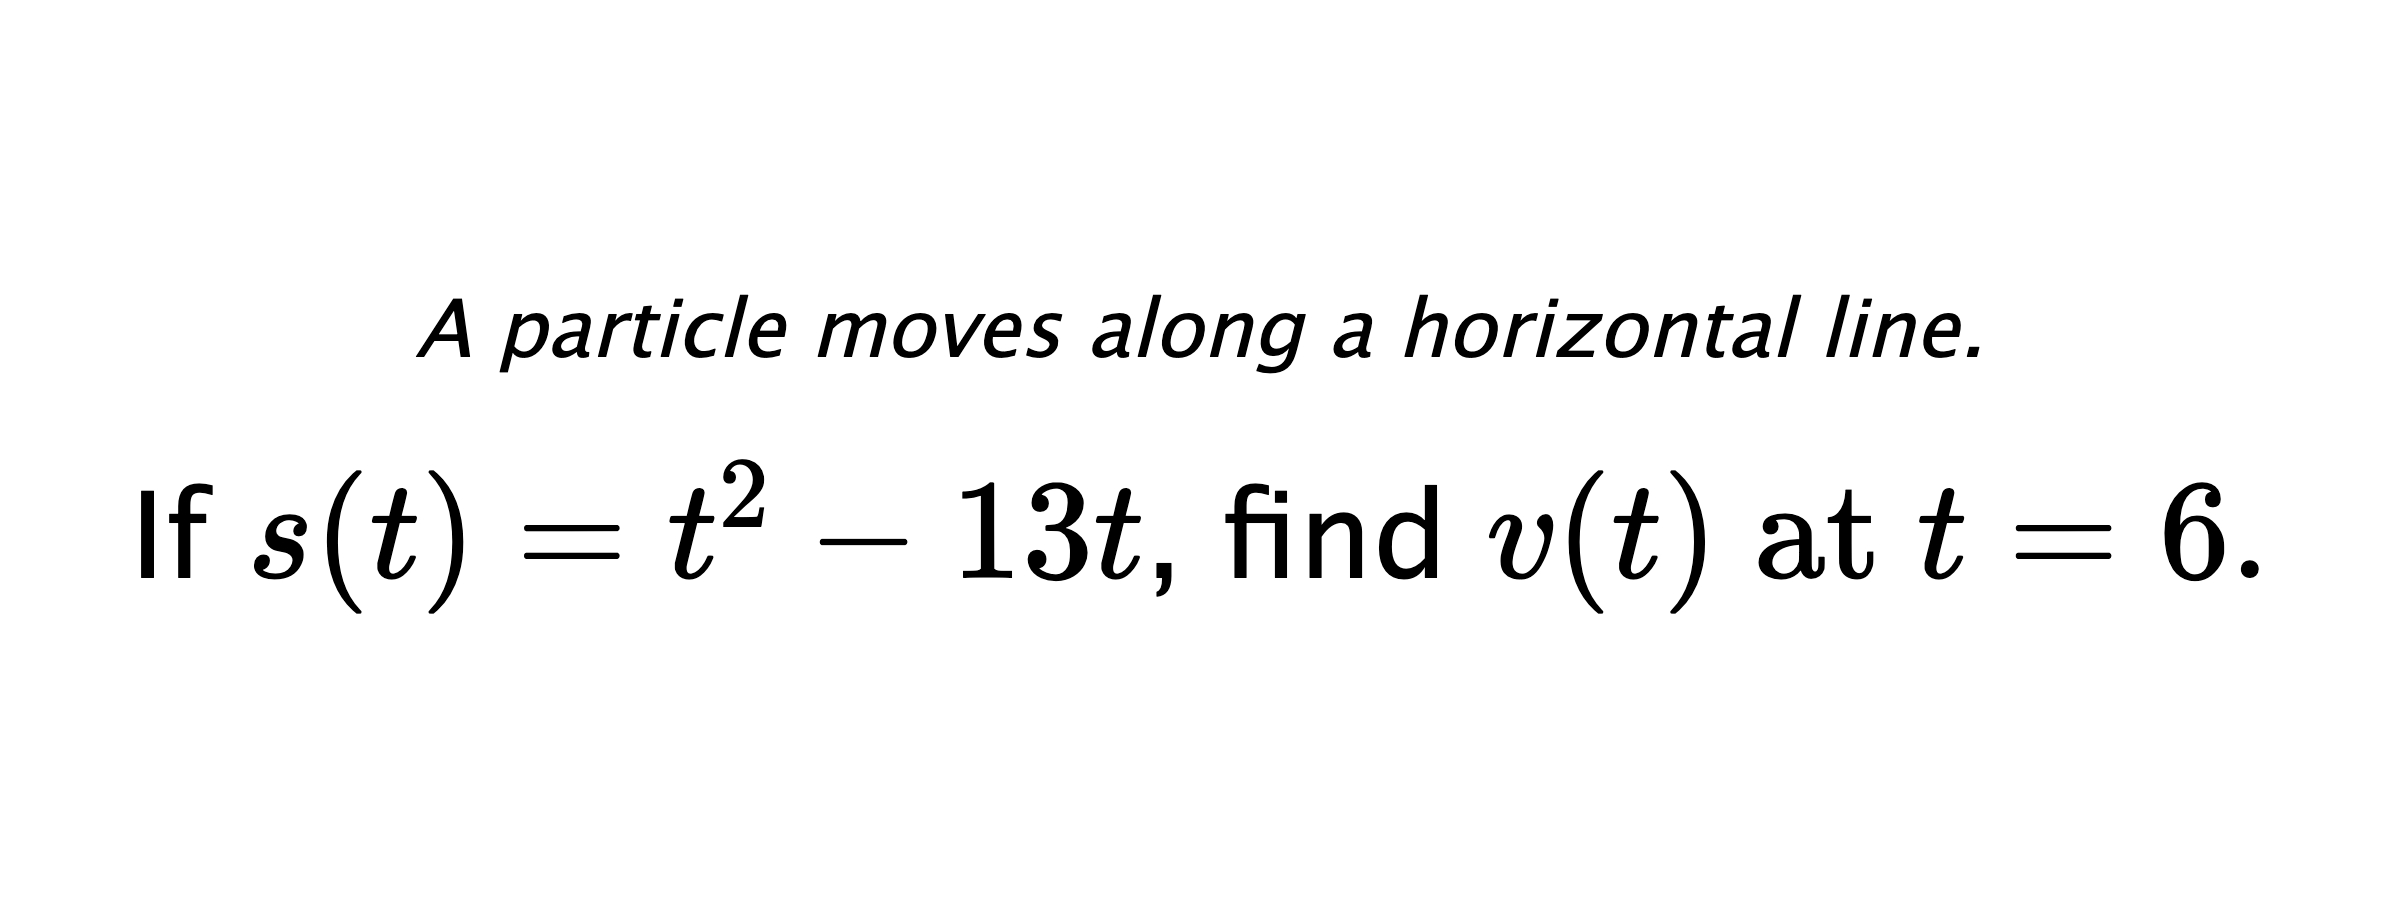 A particle moves along a horizontal line. If $ s(t)=t^2-13t $, find $ v(t) \text{ at } t=6. $